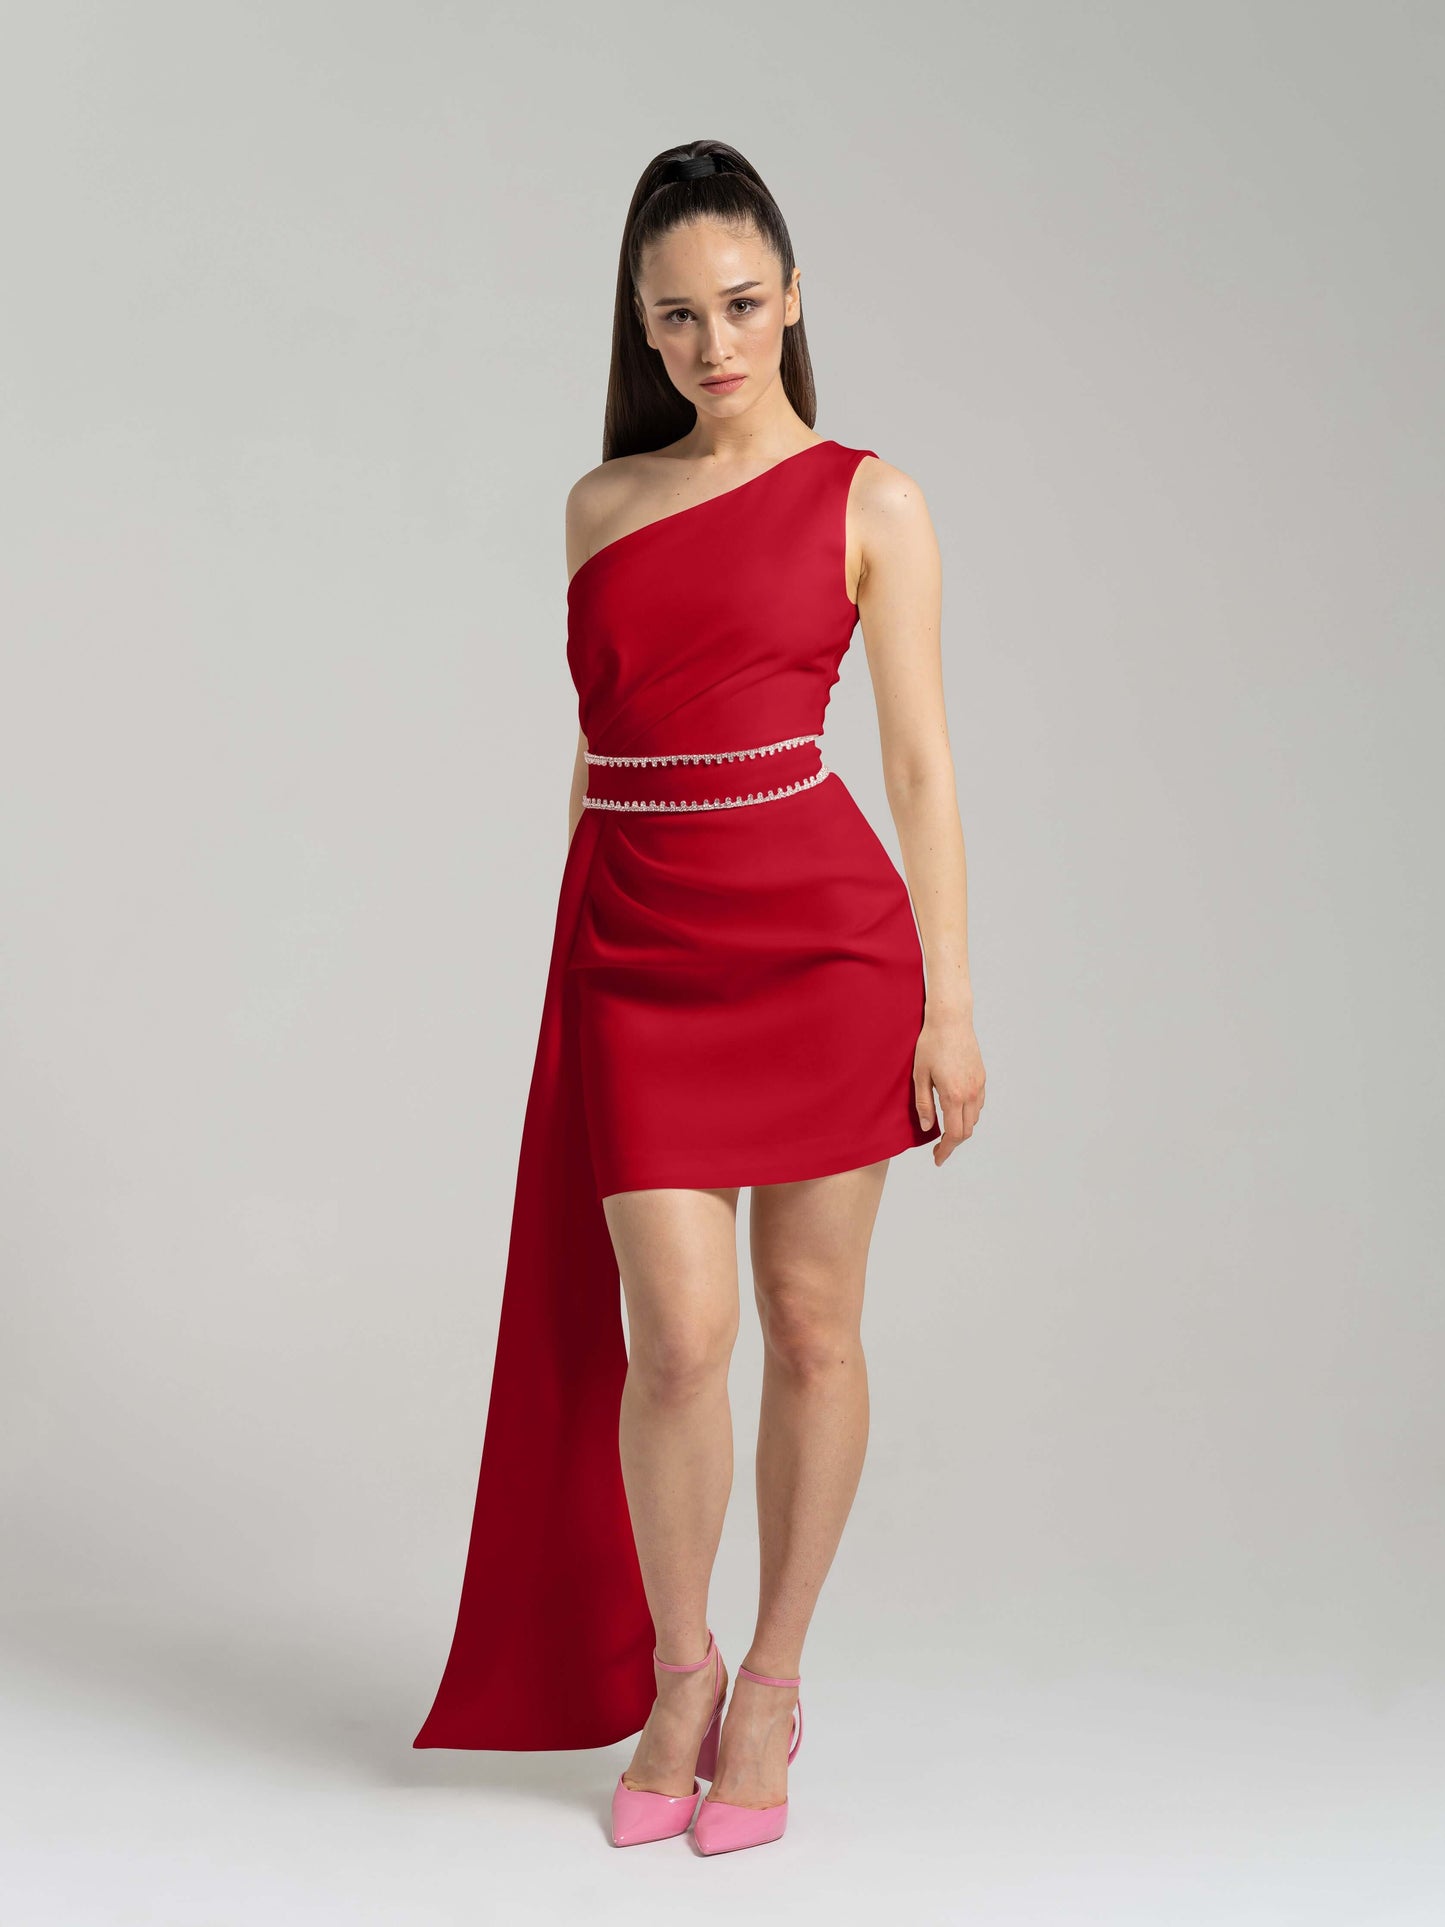 Iconic Glamour Crystal-Adorned Short Dress - Fierce Red